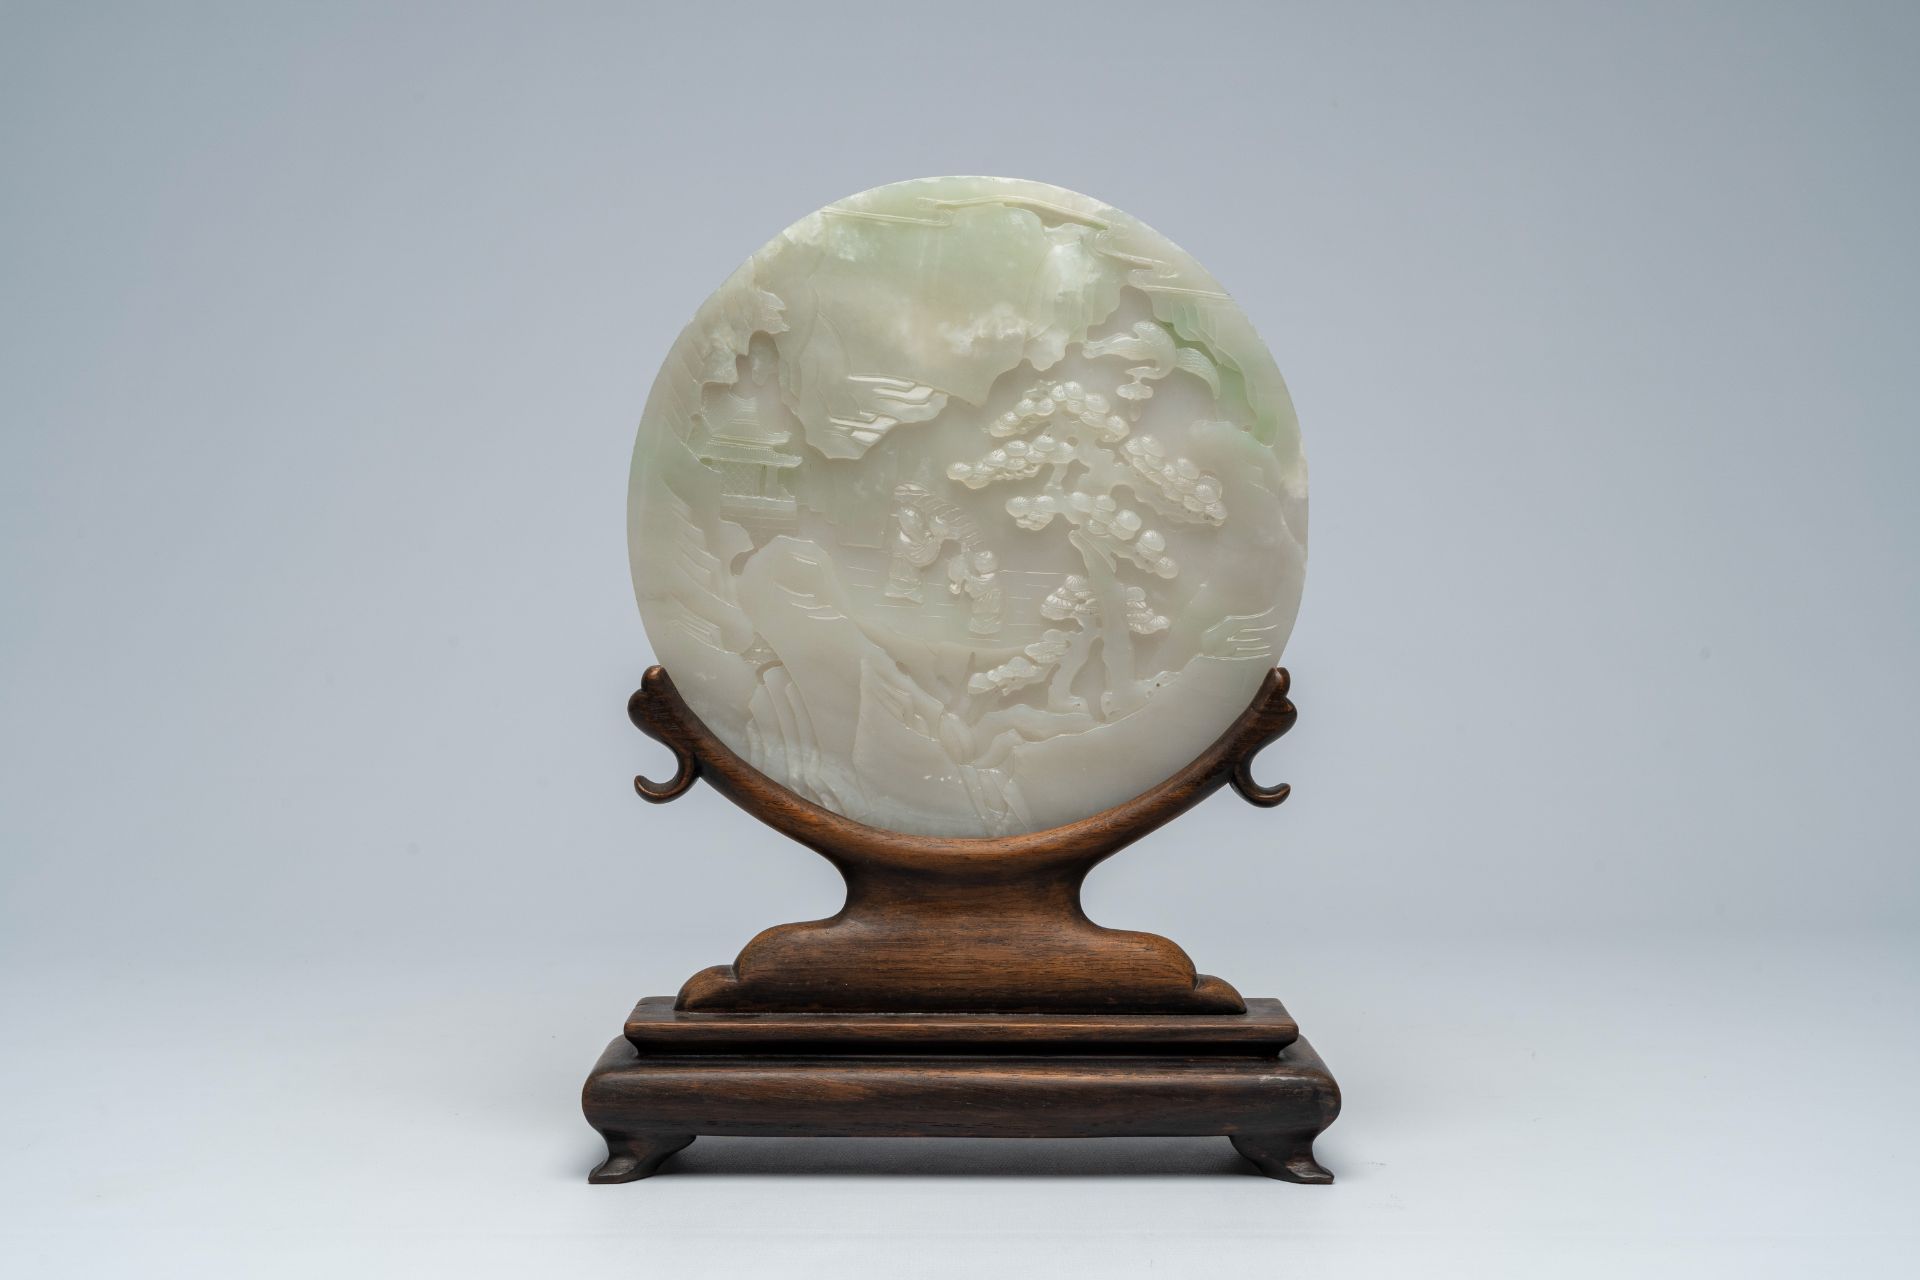 A large Chinese white jade plaque with figures in a landscape on a wooden stand, 19th/20th C